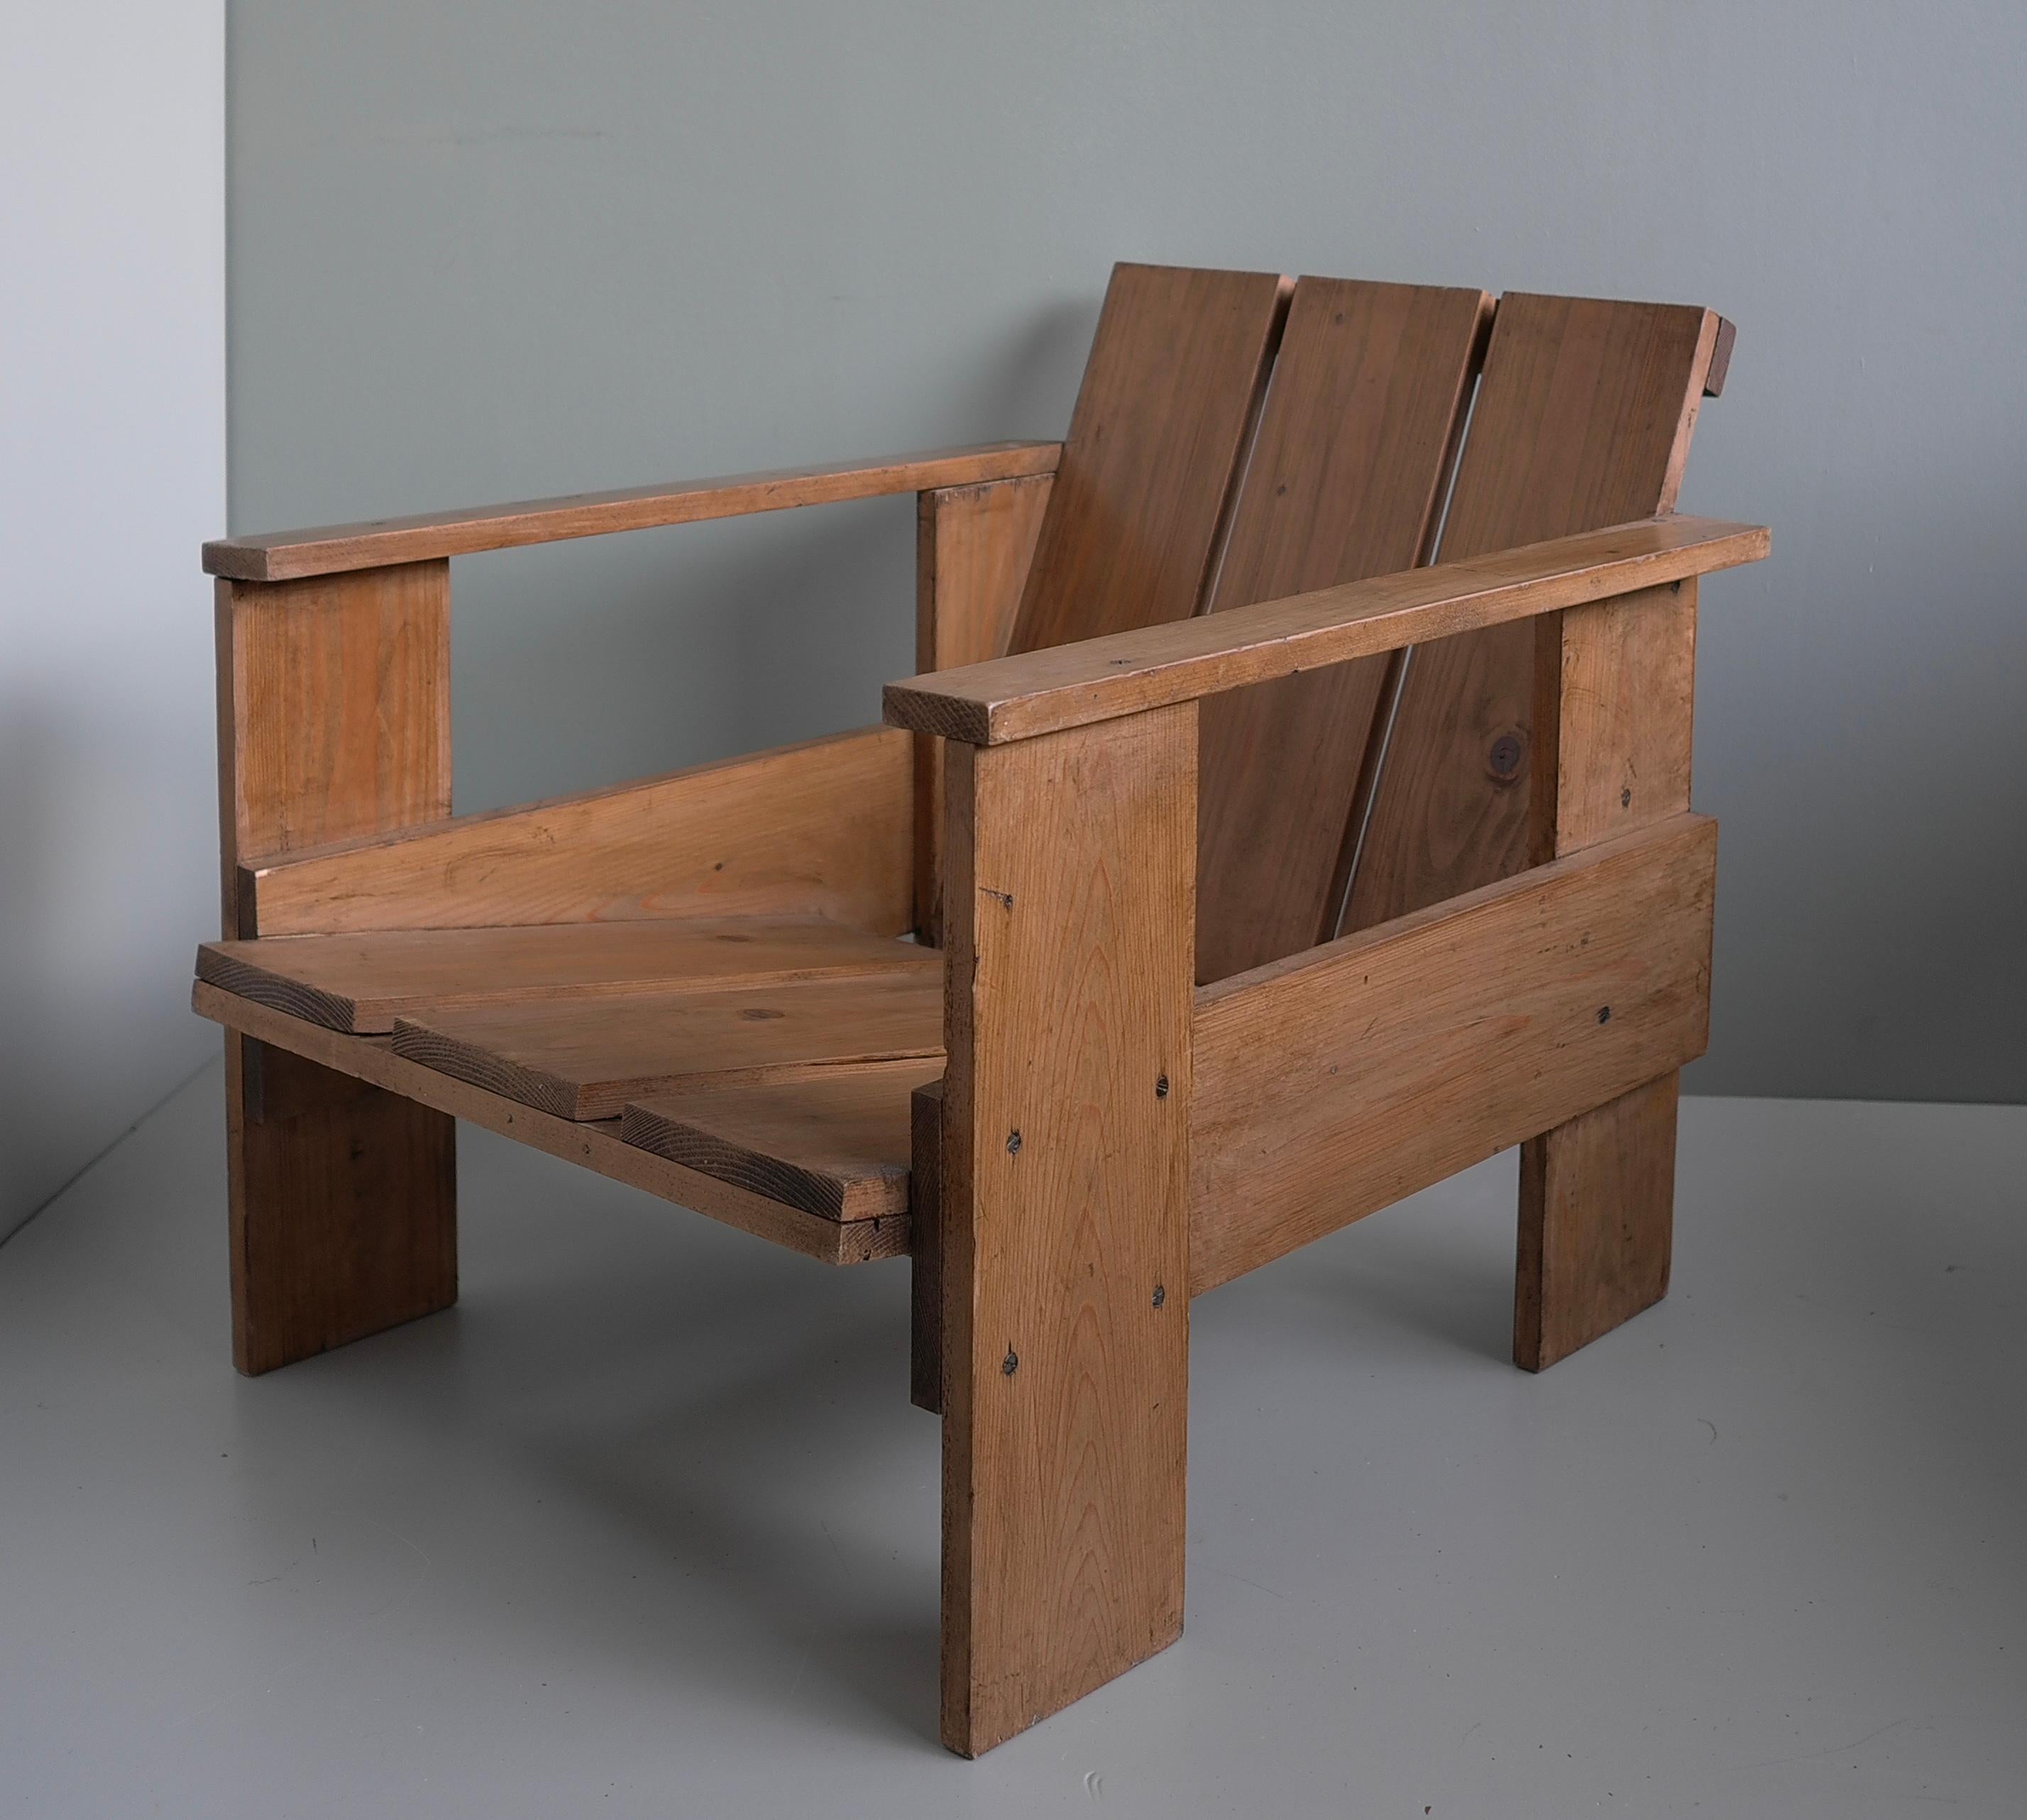 Crate Chair in style of Gerrit Rietveld, The Netherlands 1960's. In solid Pinewood with lovely patina and wear.